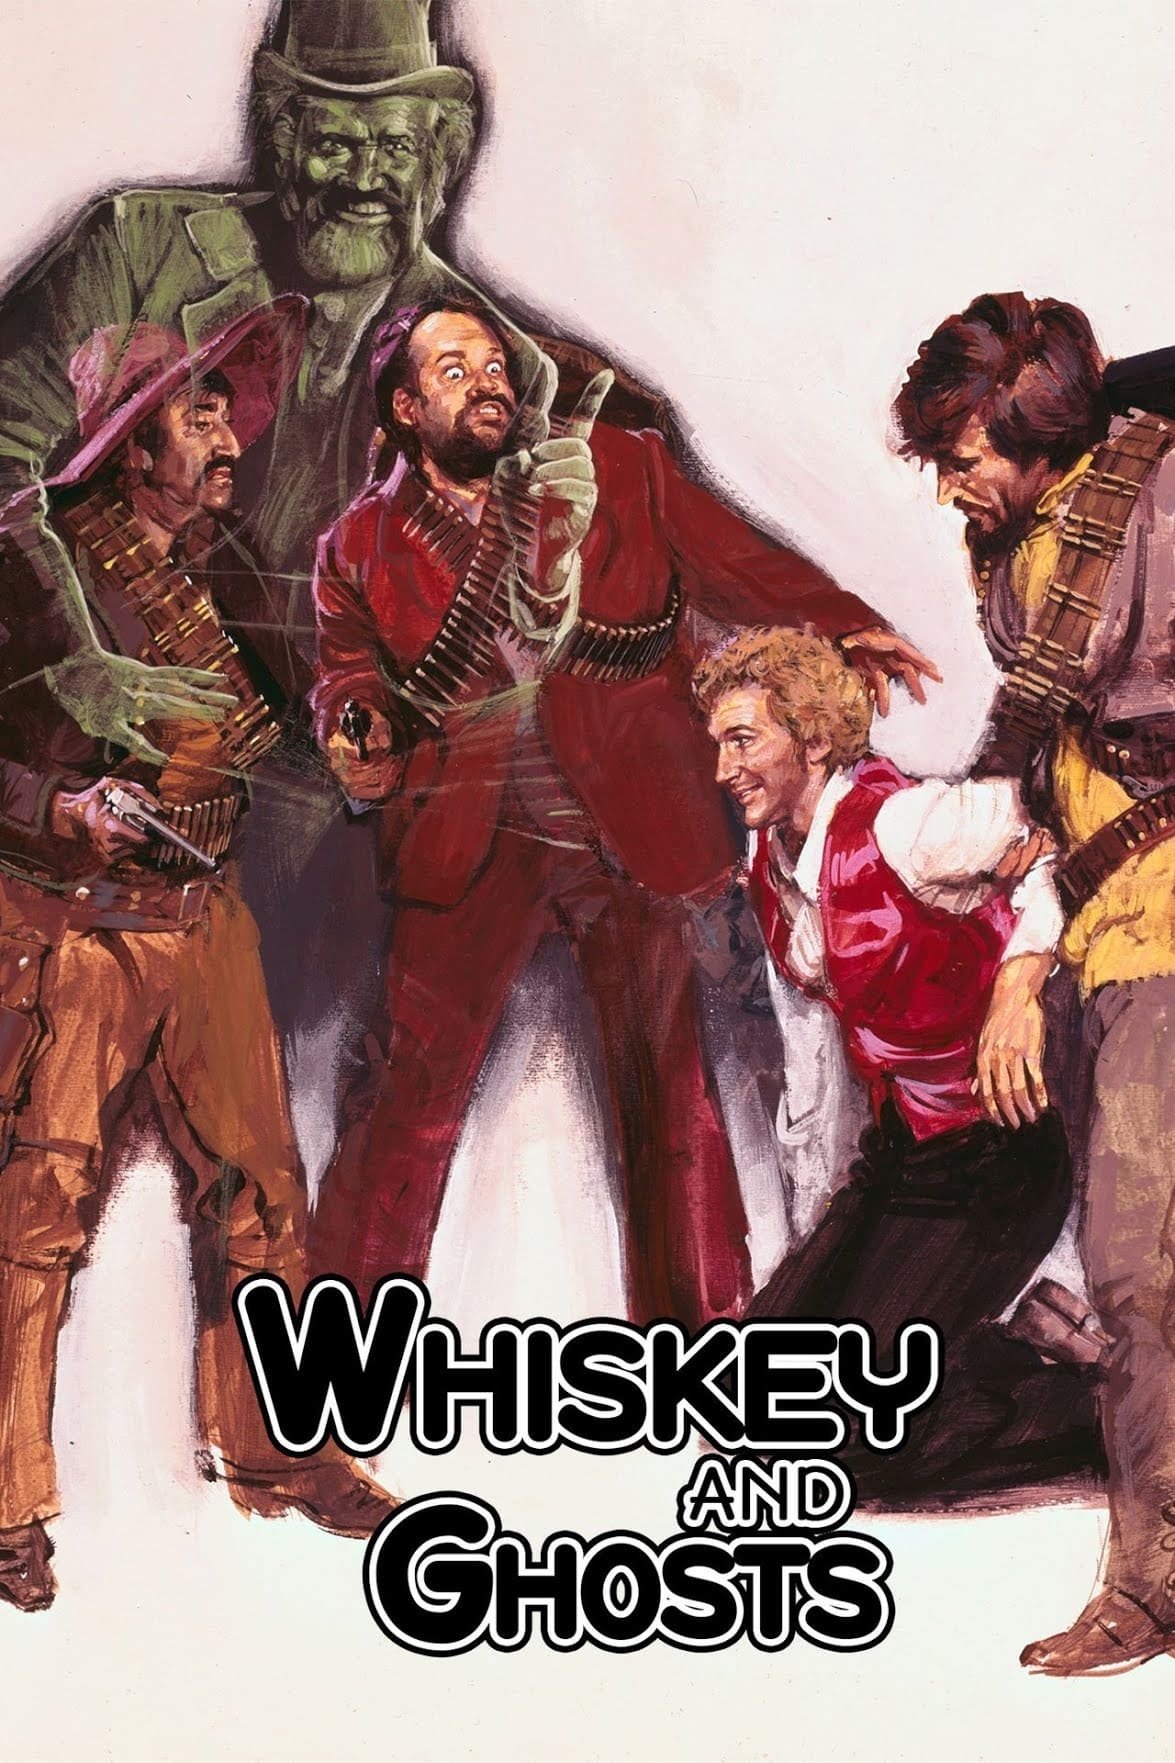 Whisky and Ghosts (1974)